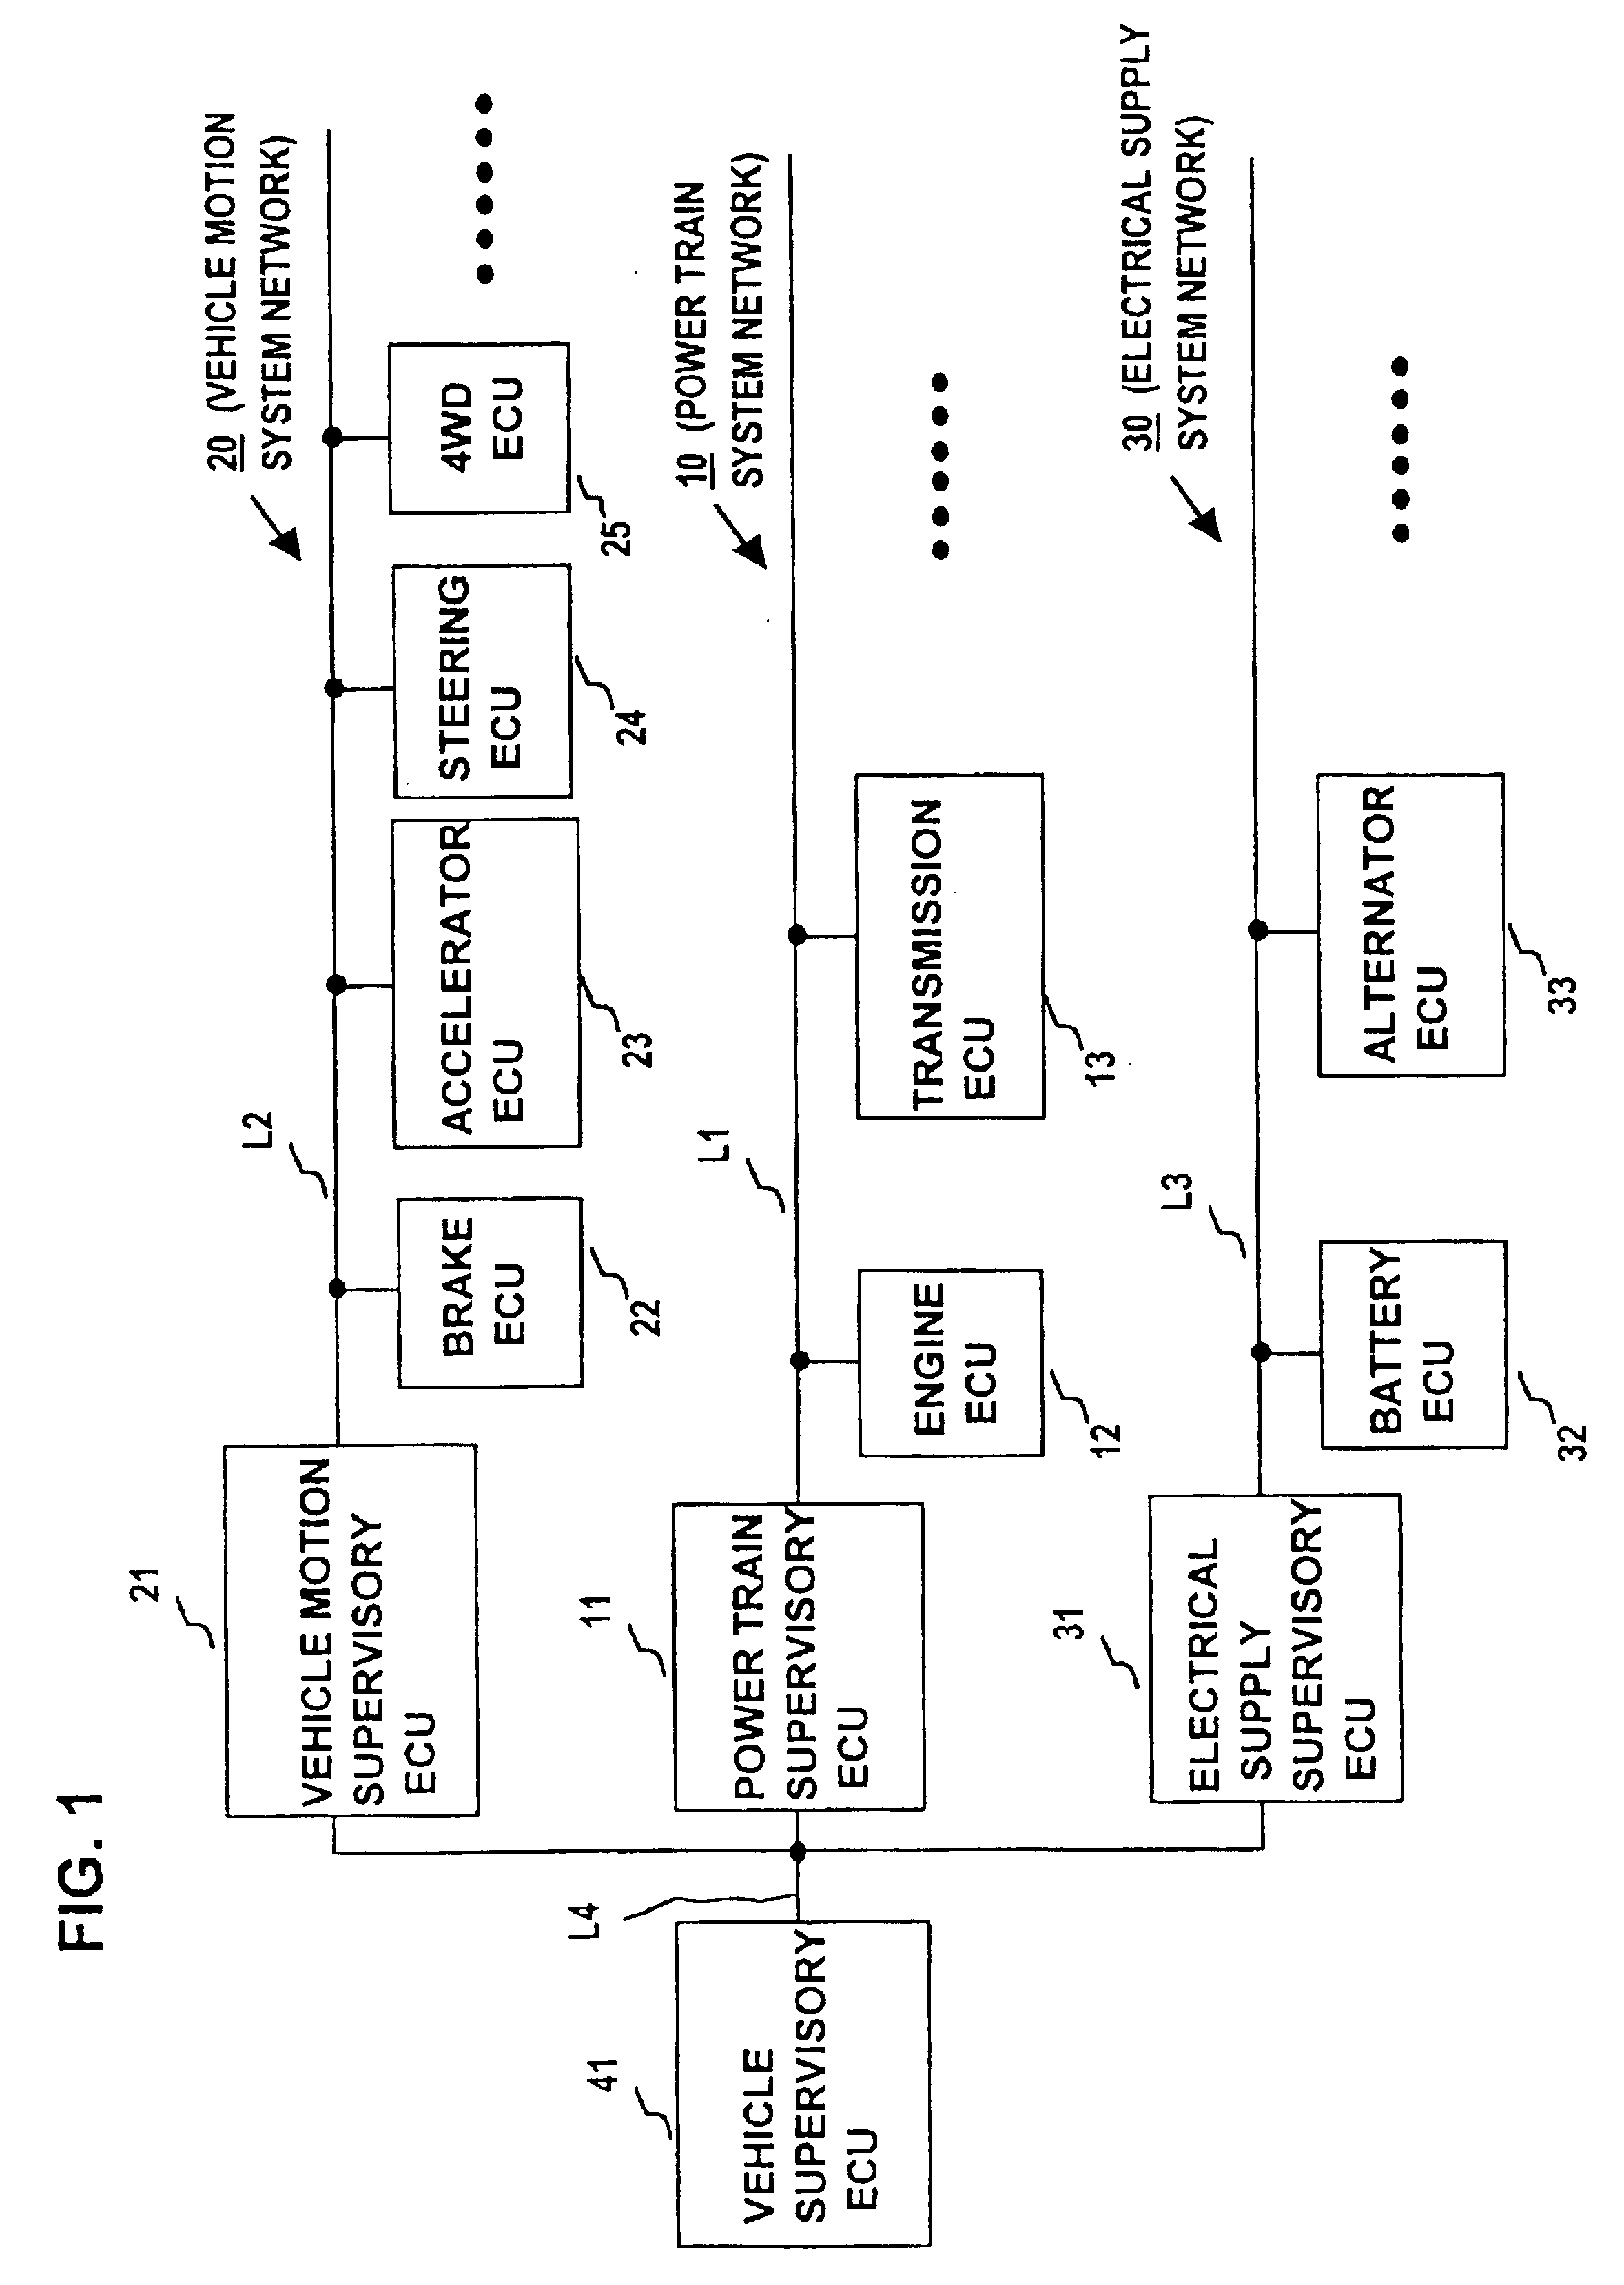 Vehicle data communication system having supervised coordination of networks which control respective basic operating functions of vehicle